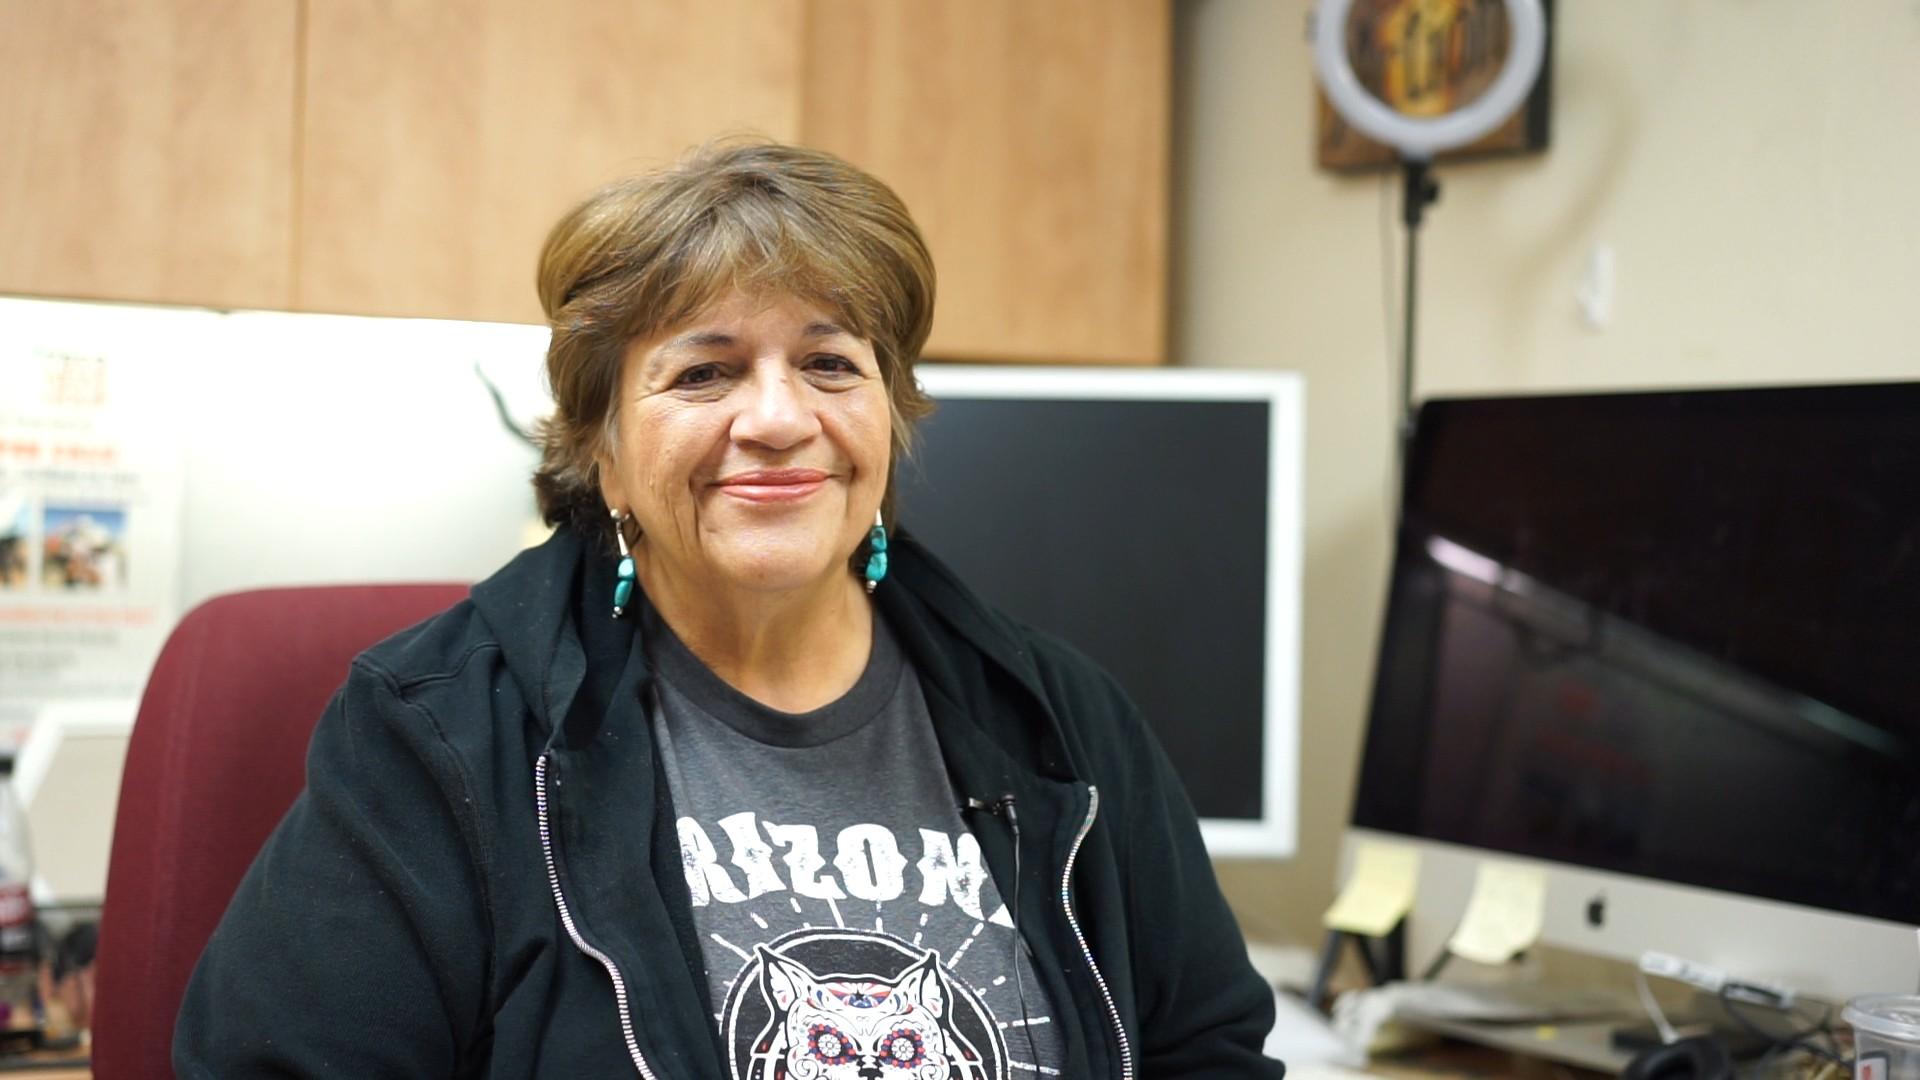 Nancy Montoya, director and founder of the Digital Futures Bilingual Studio, provides paid and unpaid internships for students looking to develop their multimedia skills (Photo by Anto Chavez)